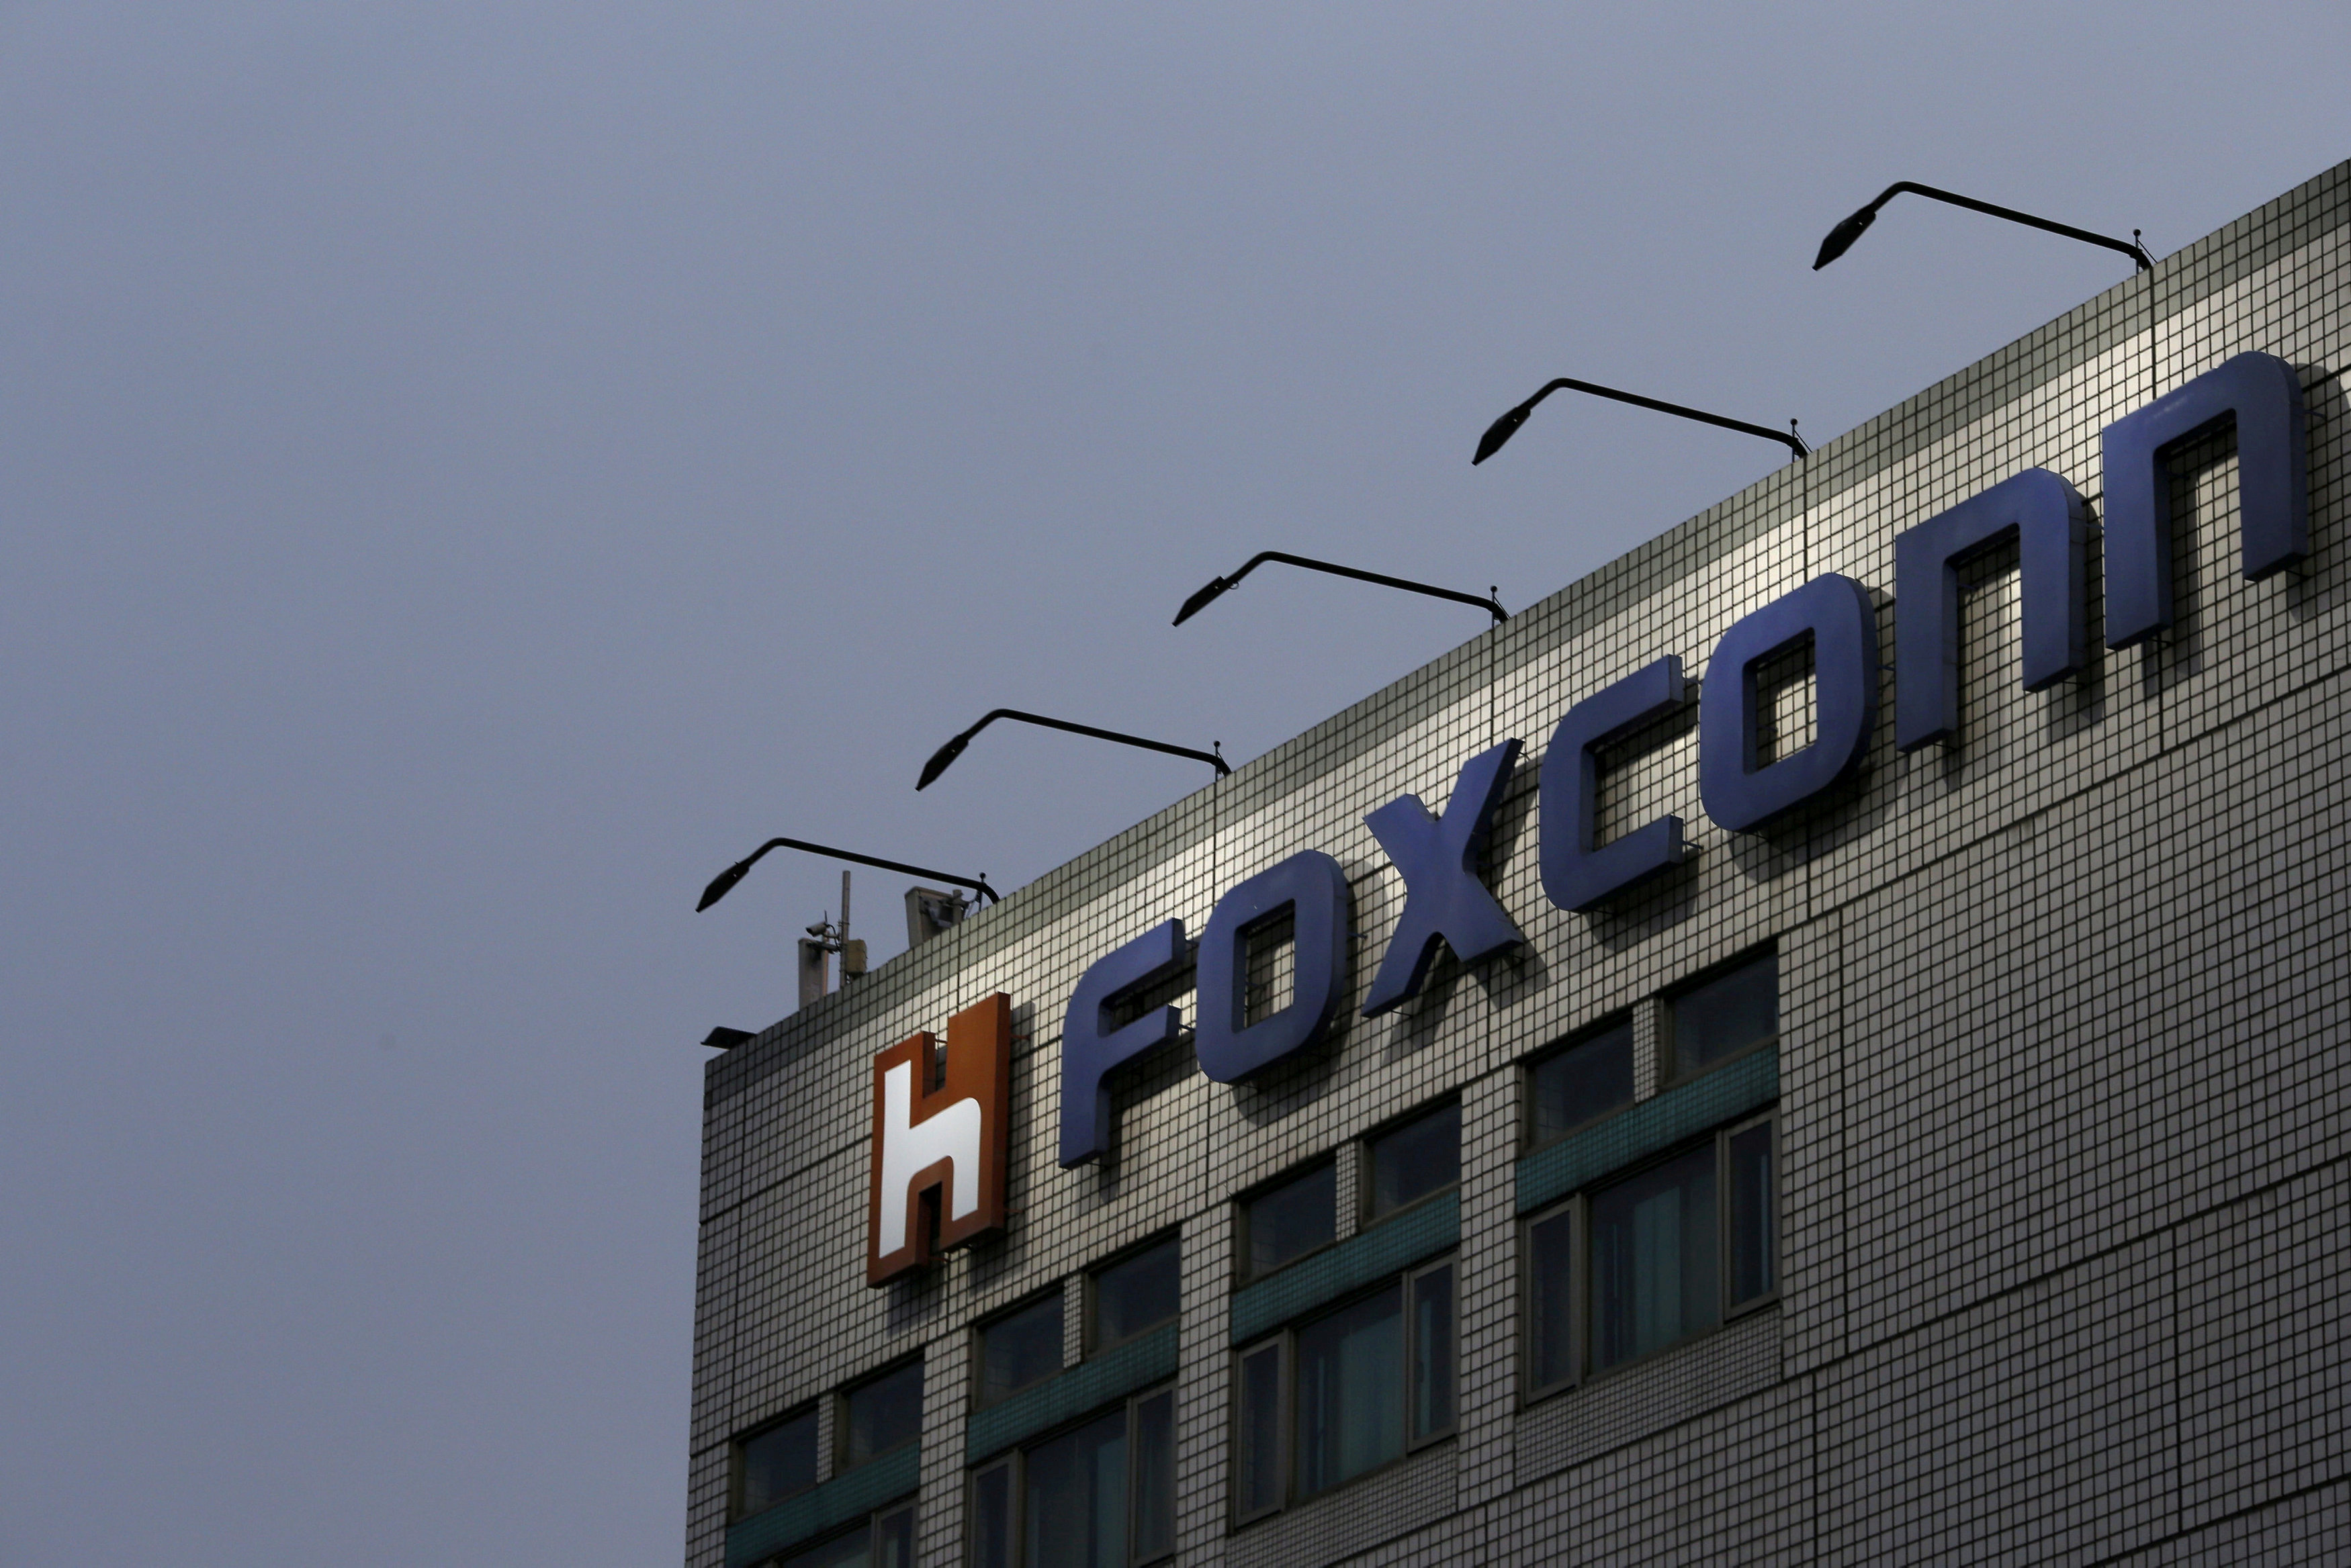 The logo of Foxconn, the trading name of Hon Hai Precision Industry, is seen on top of the company's headquarters in New Taipei City, Taiwan